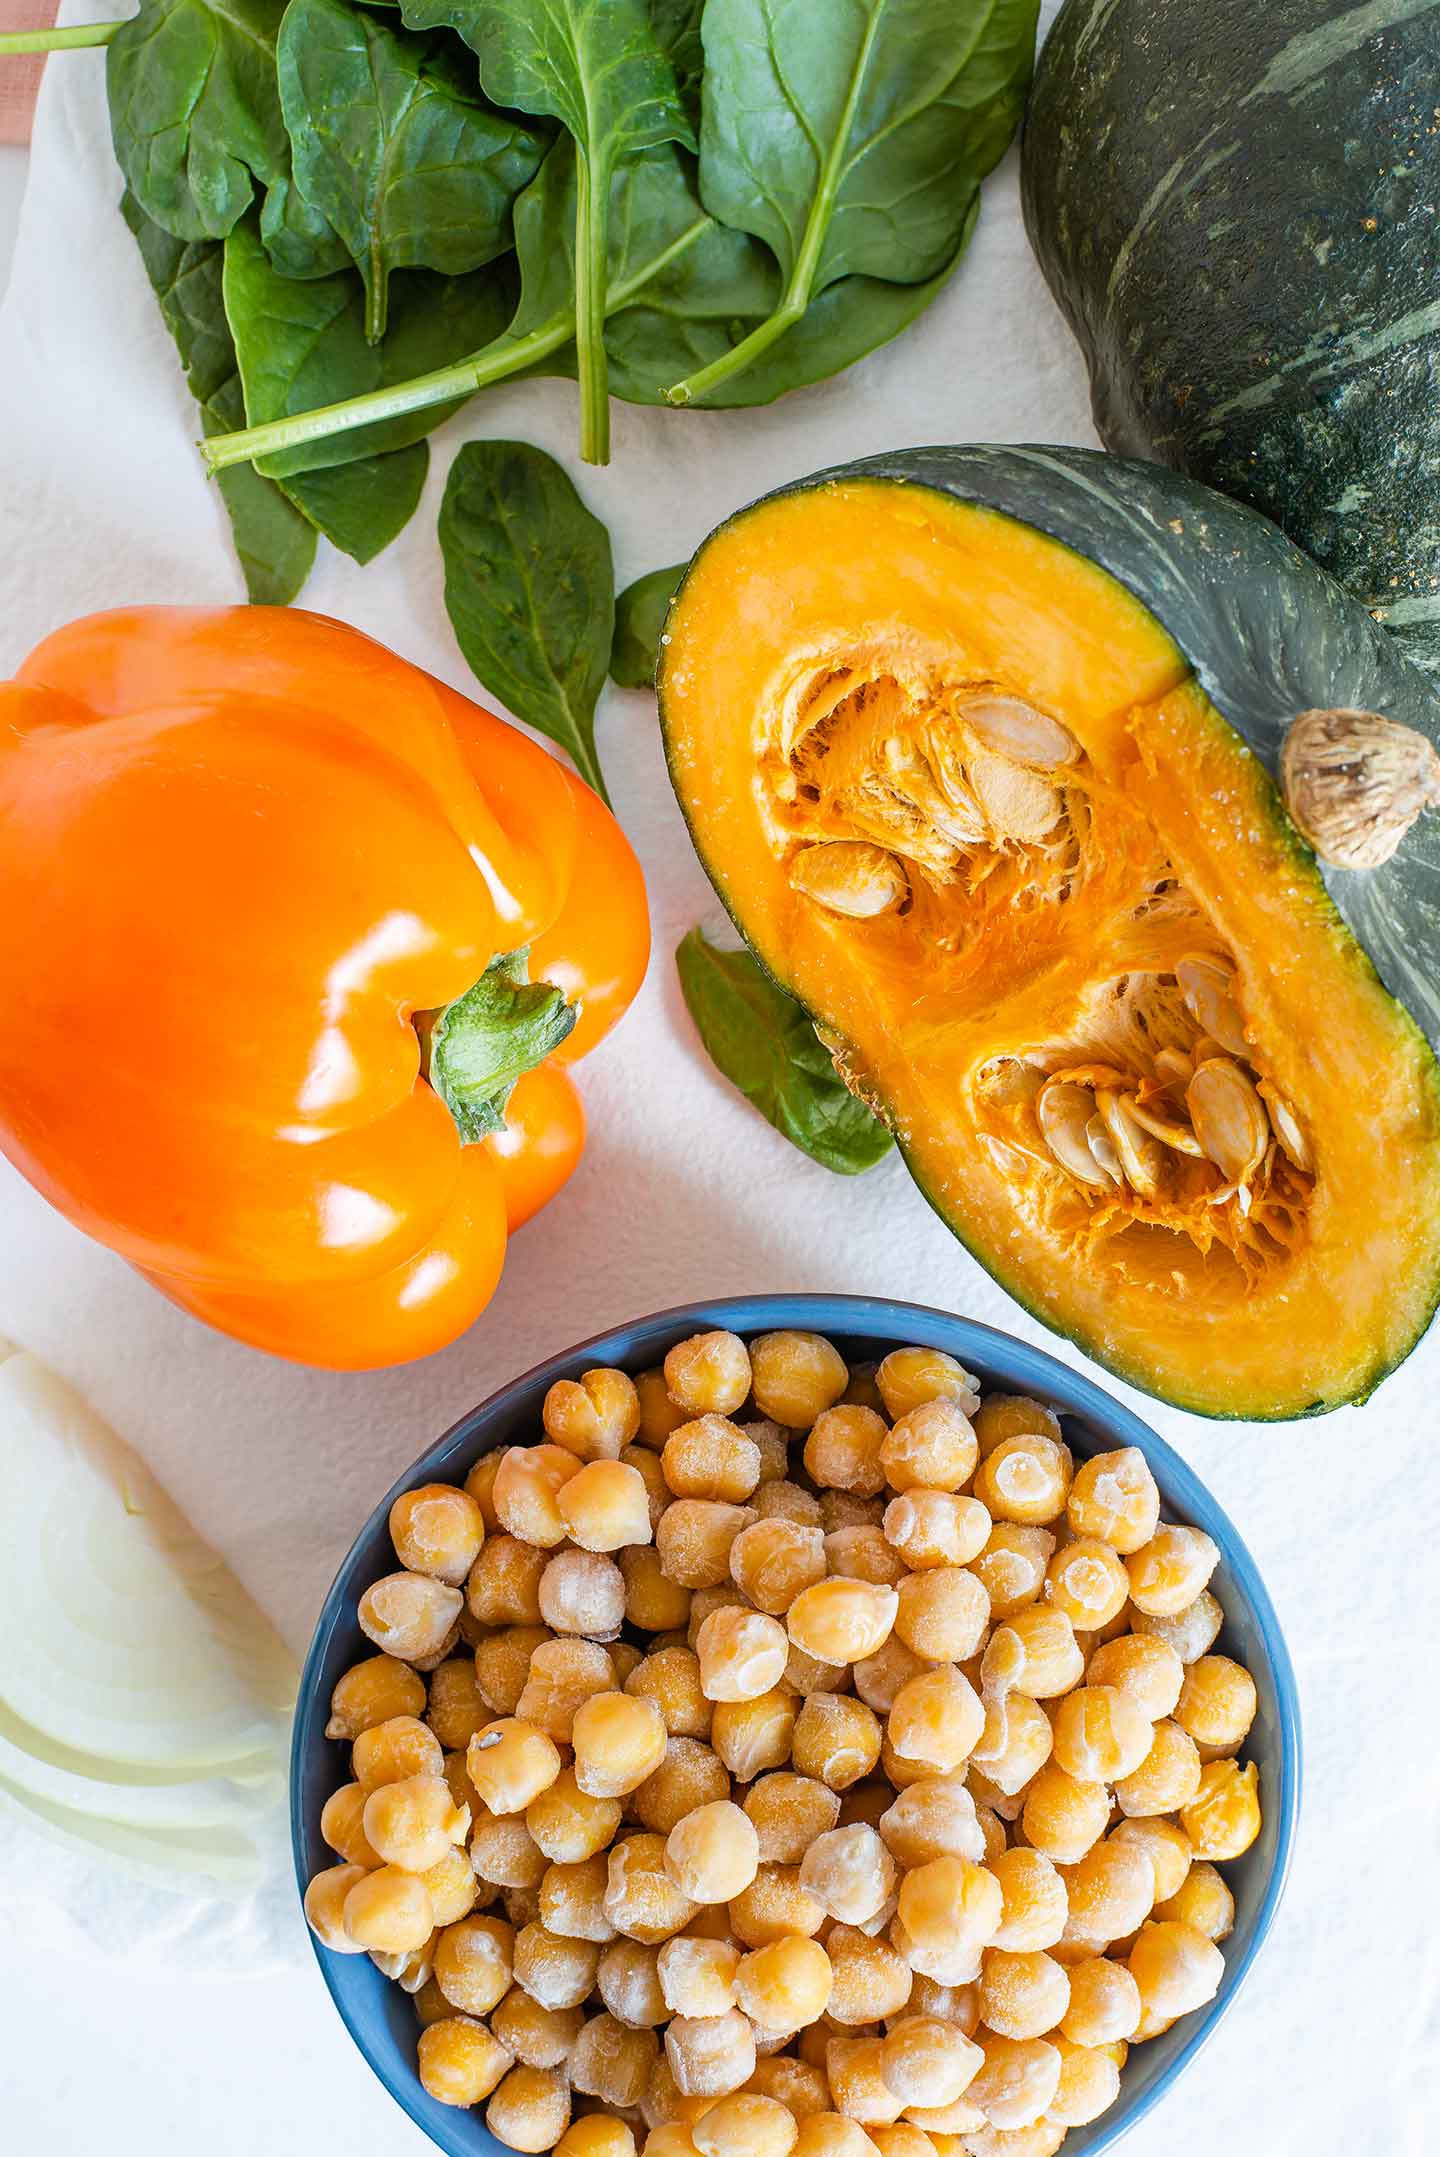 Top down view of a small kabocha squash sliced in half and surrounded by cooked chickpeas, an orange bell pepper, and baby spinach leaves.